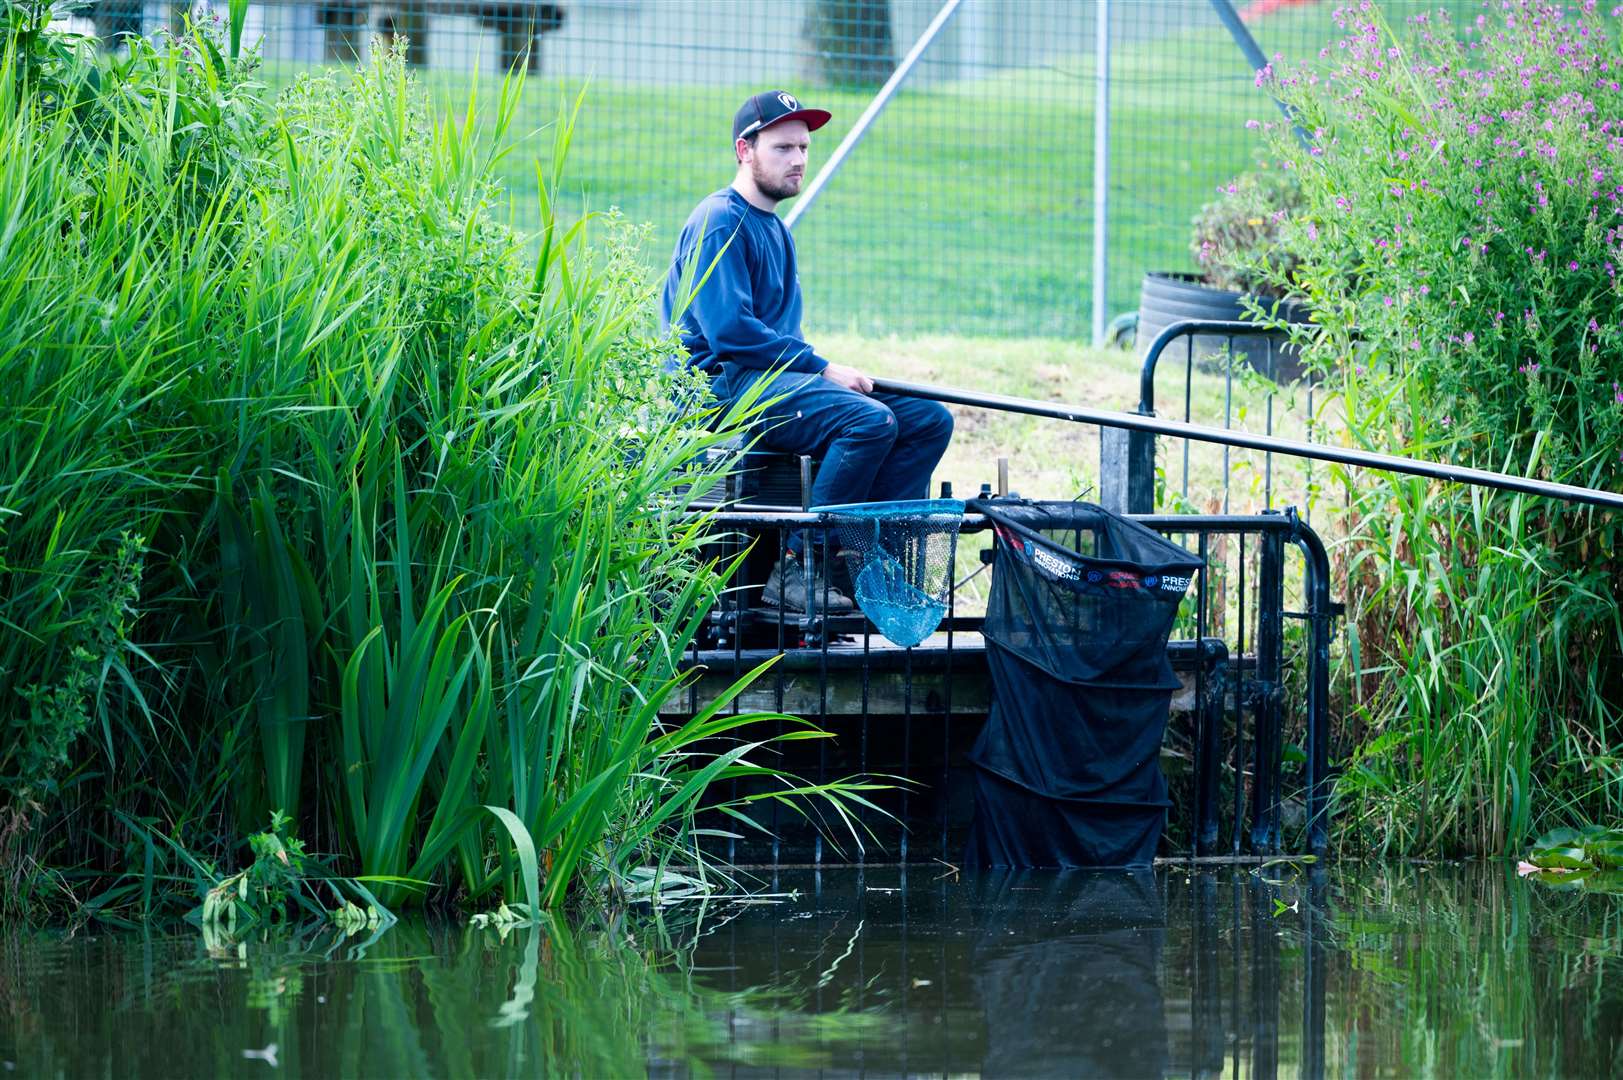 The West Norfolk Disabled Angling Club '97' memorial fishing match at Alive Lynnsport